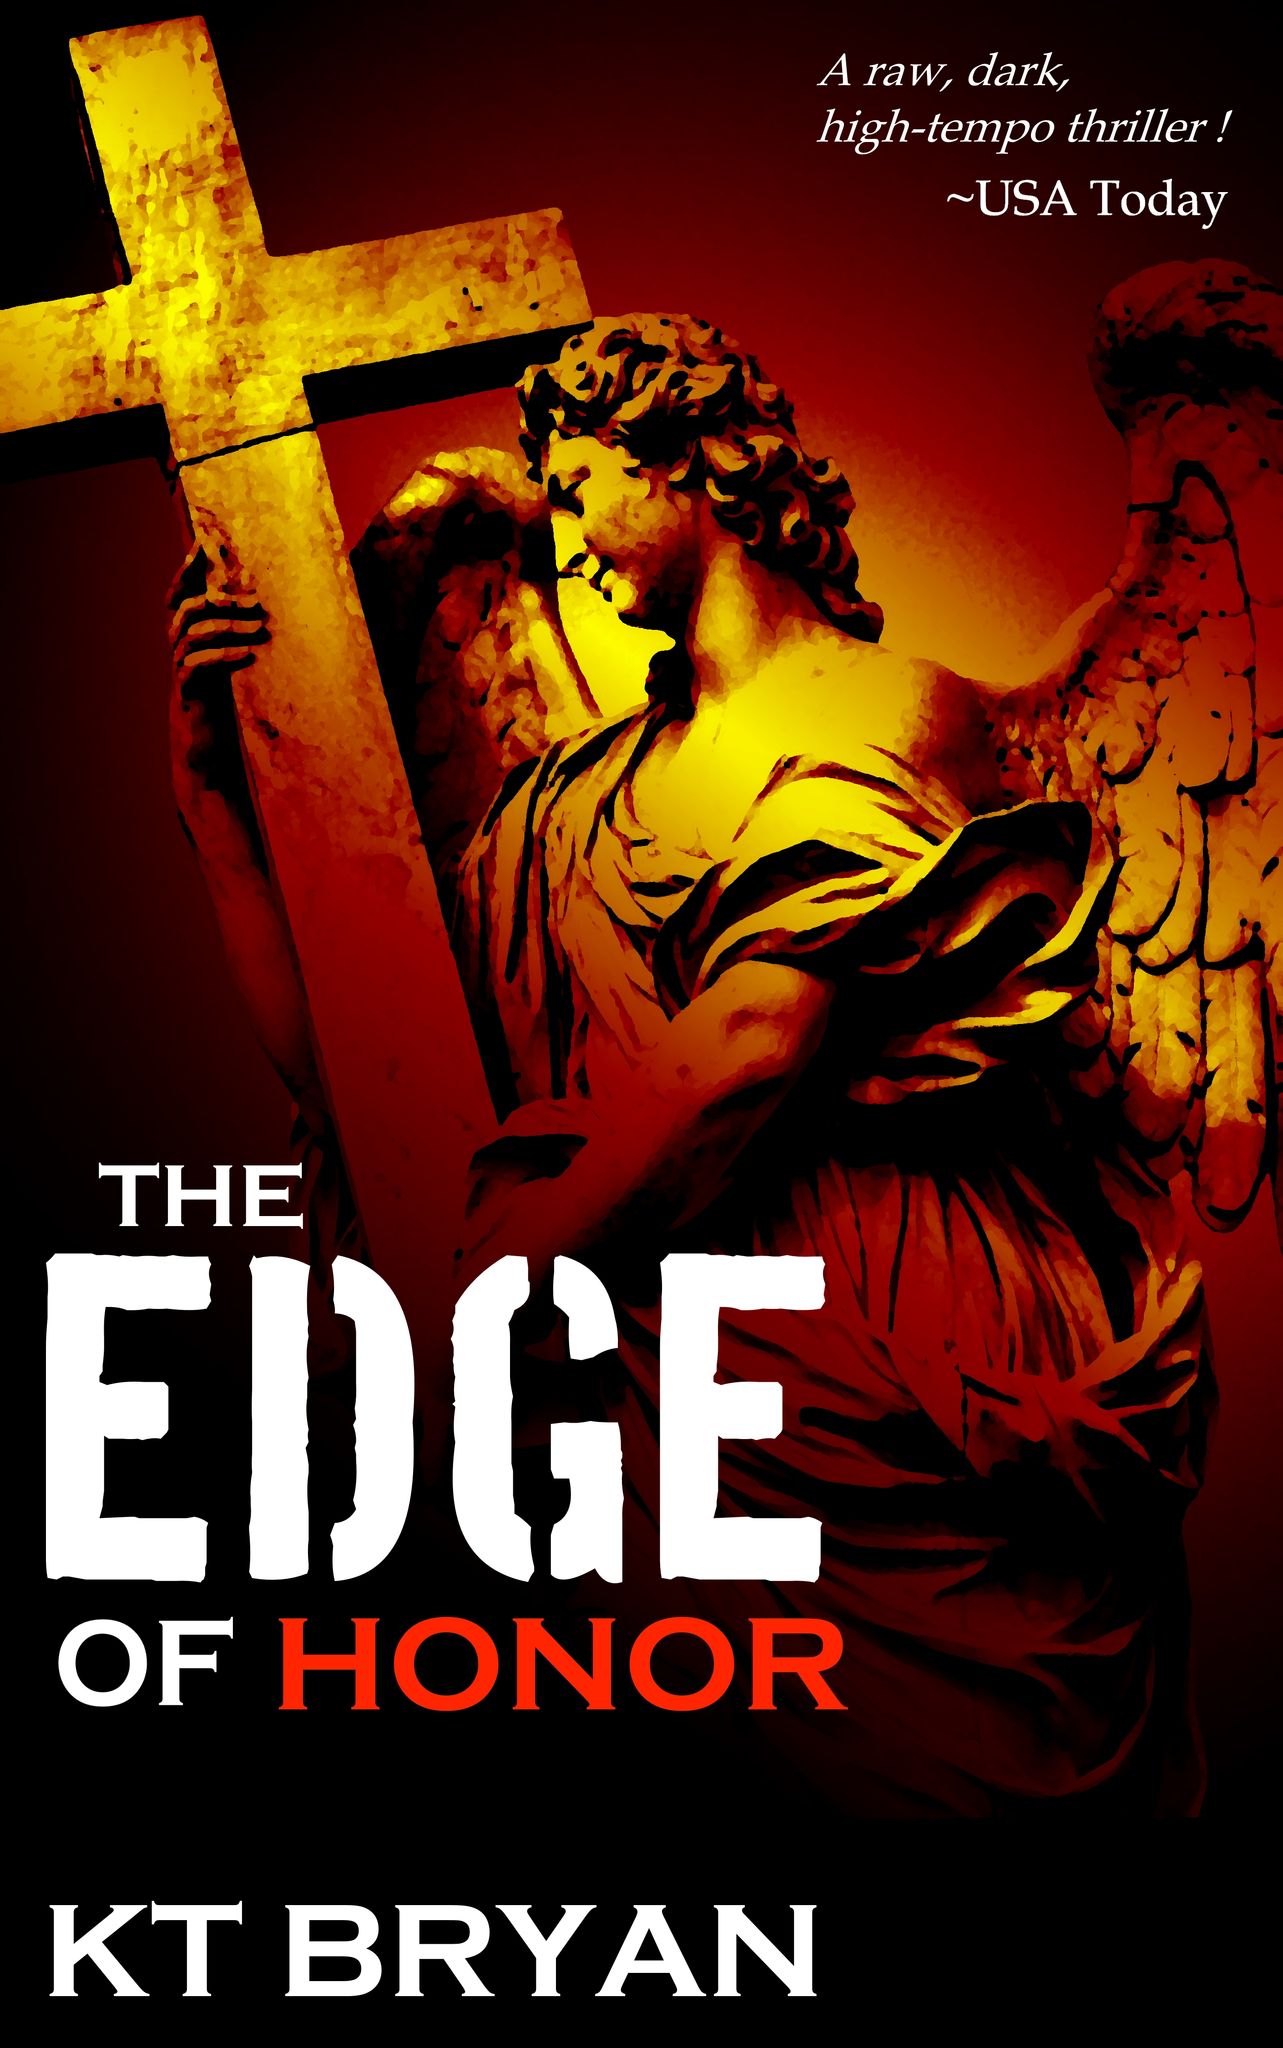 THE EDGE OF HONOR